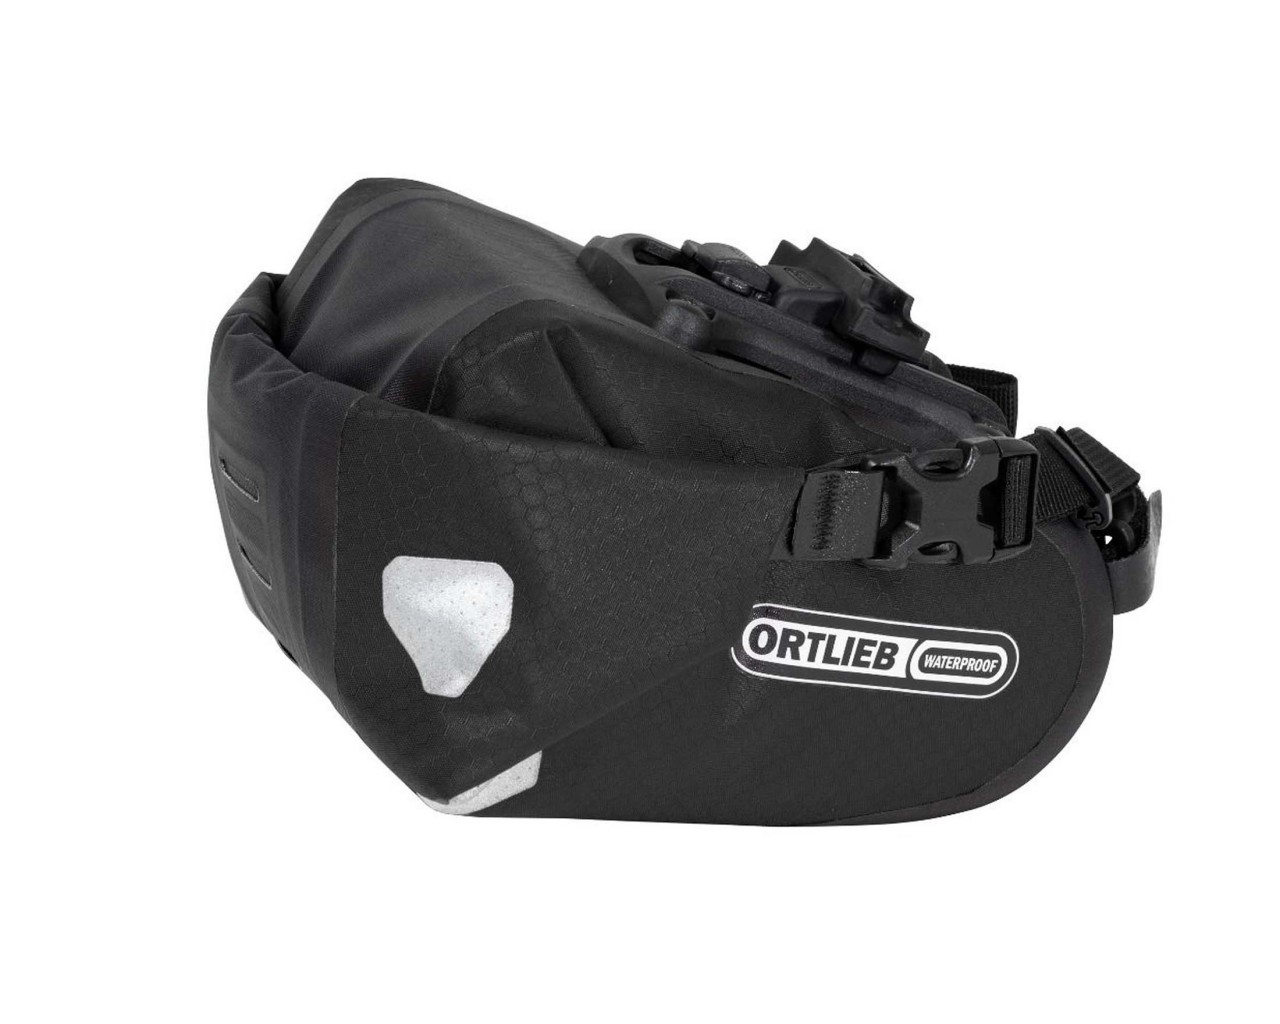 Ortlieb Saddle-Bag TWO 1.6 litres waterproof bycicle seat pack | black matt